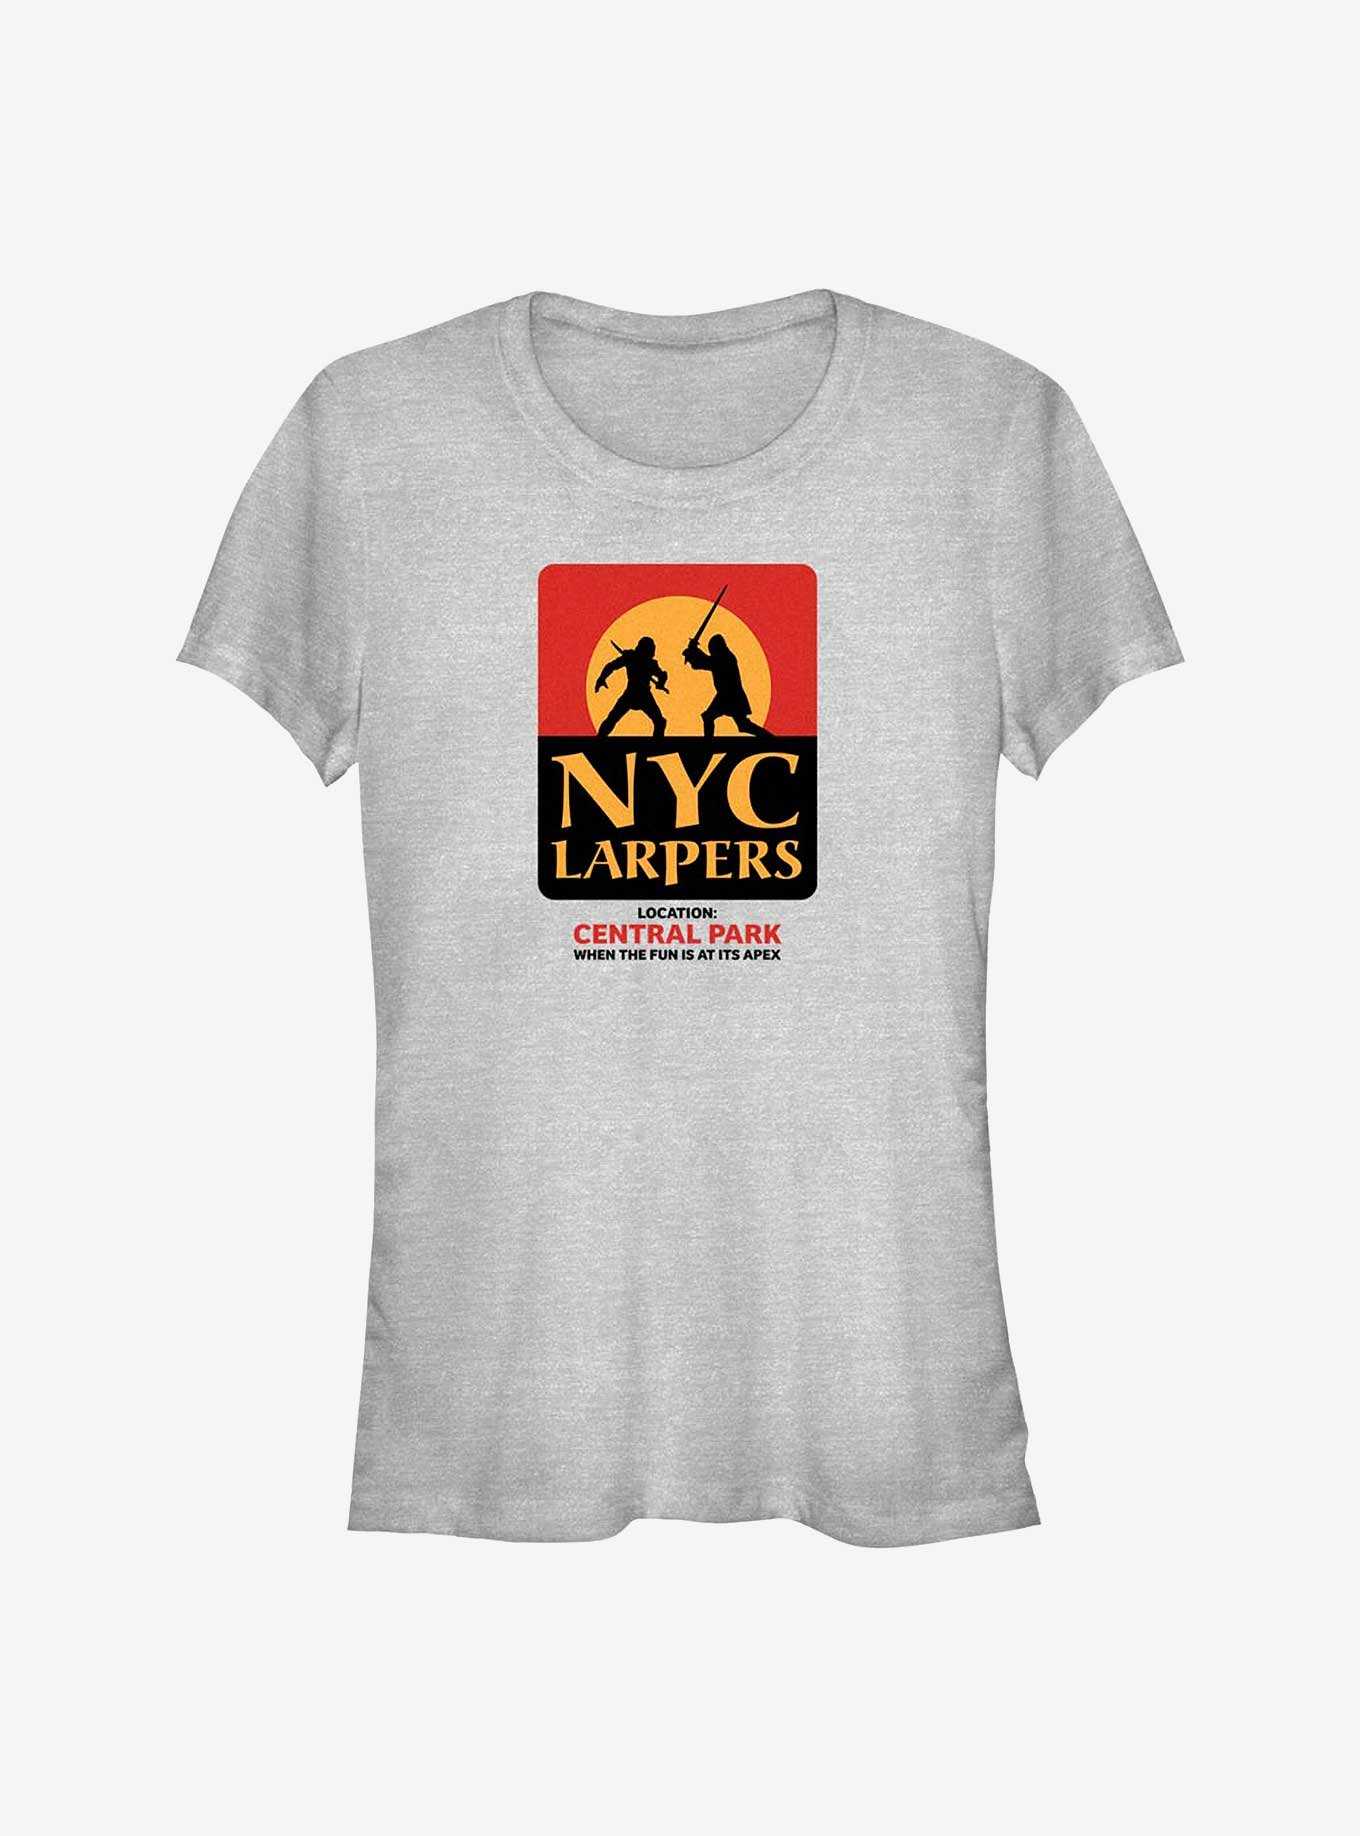 Marvel Hawkeye NYC Larpers Girl's T-Shirt, , hi-res